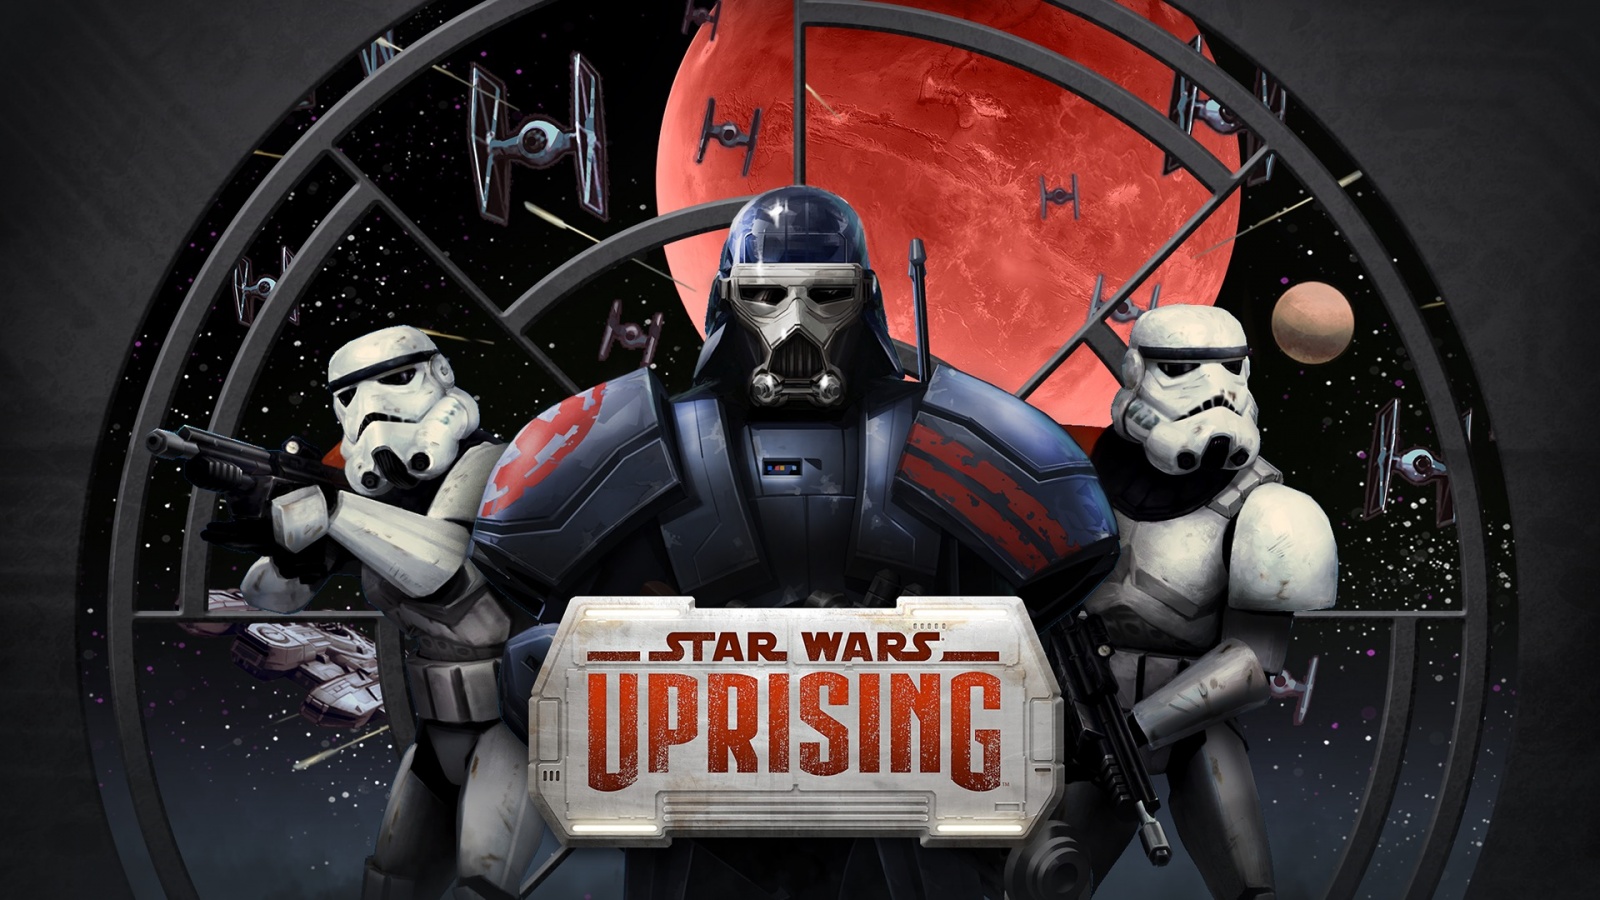 star-wars-uprising-is-hotter-than-a-night-on-hoth-inside-a-tauntaun-image-cultofandroidcomwp-contentuploads201509SWUP_EN_Title_Screen_01-jpg